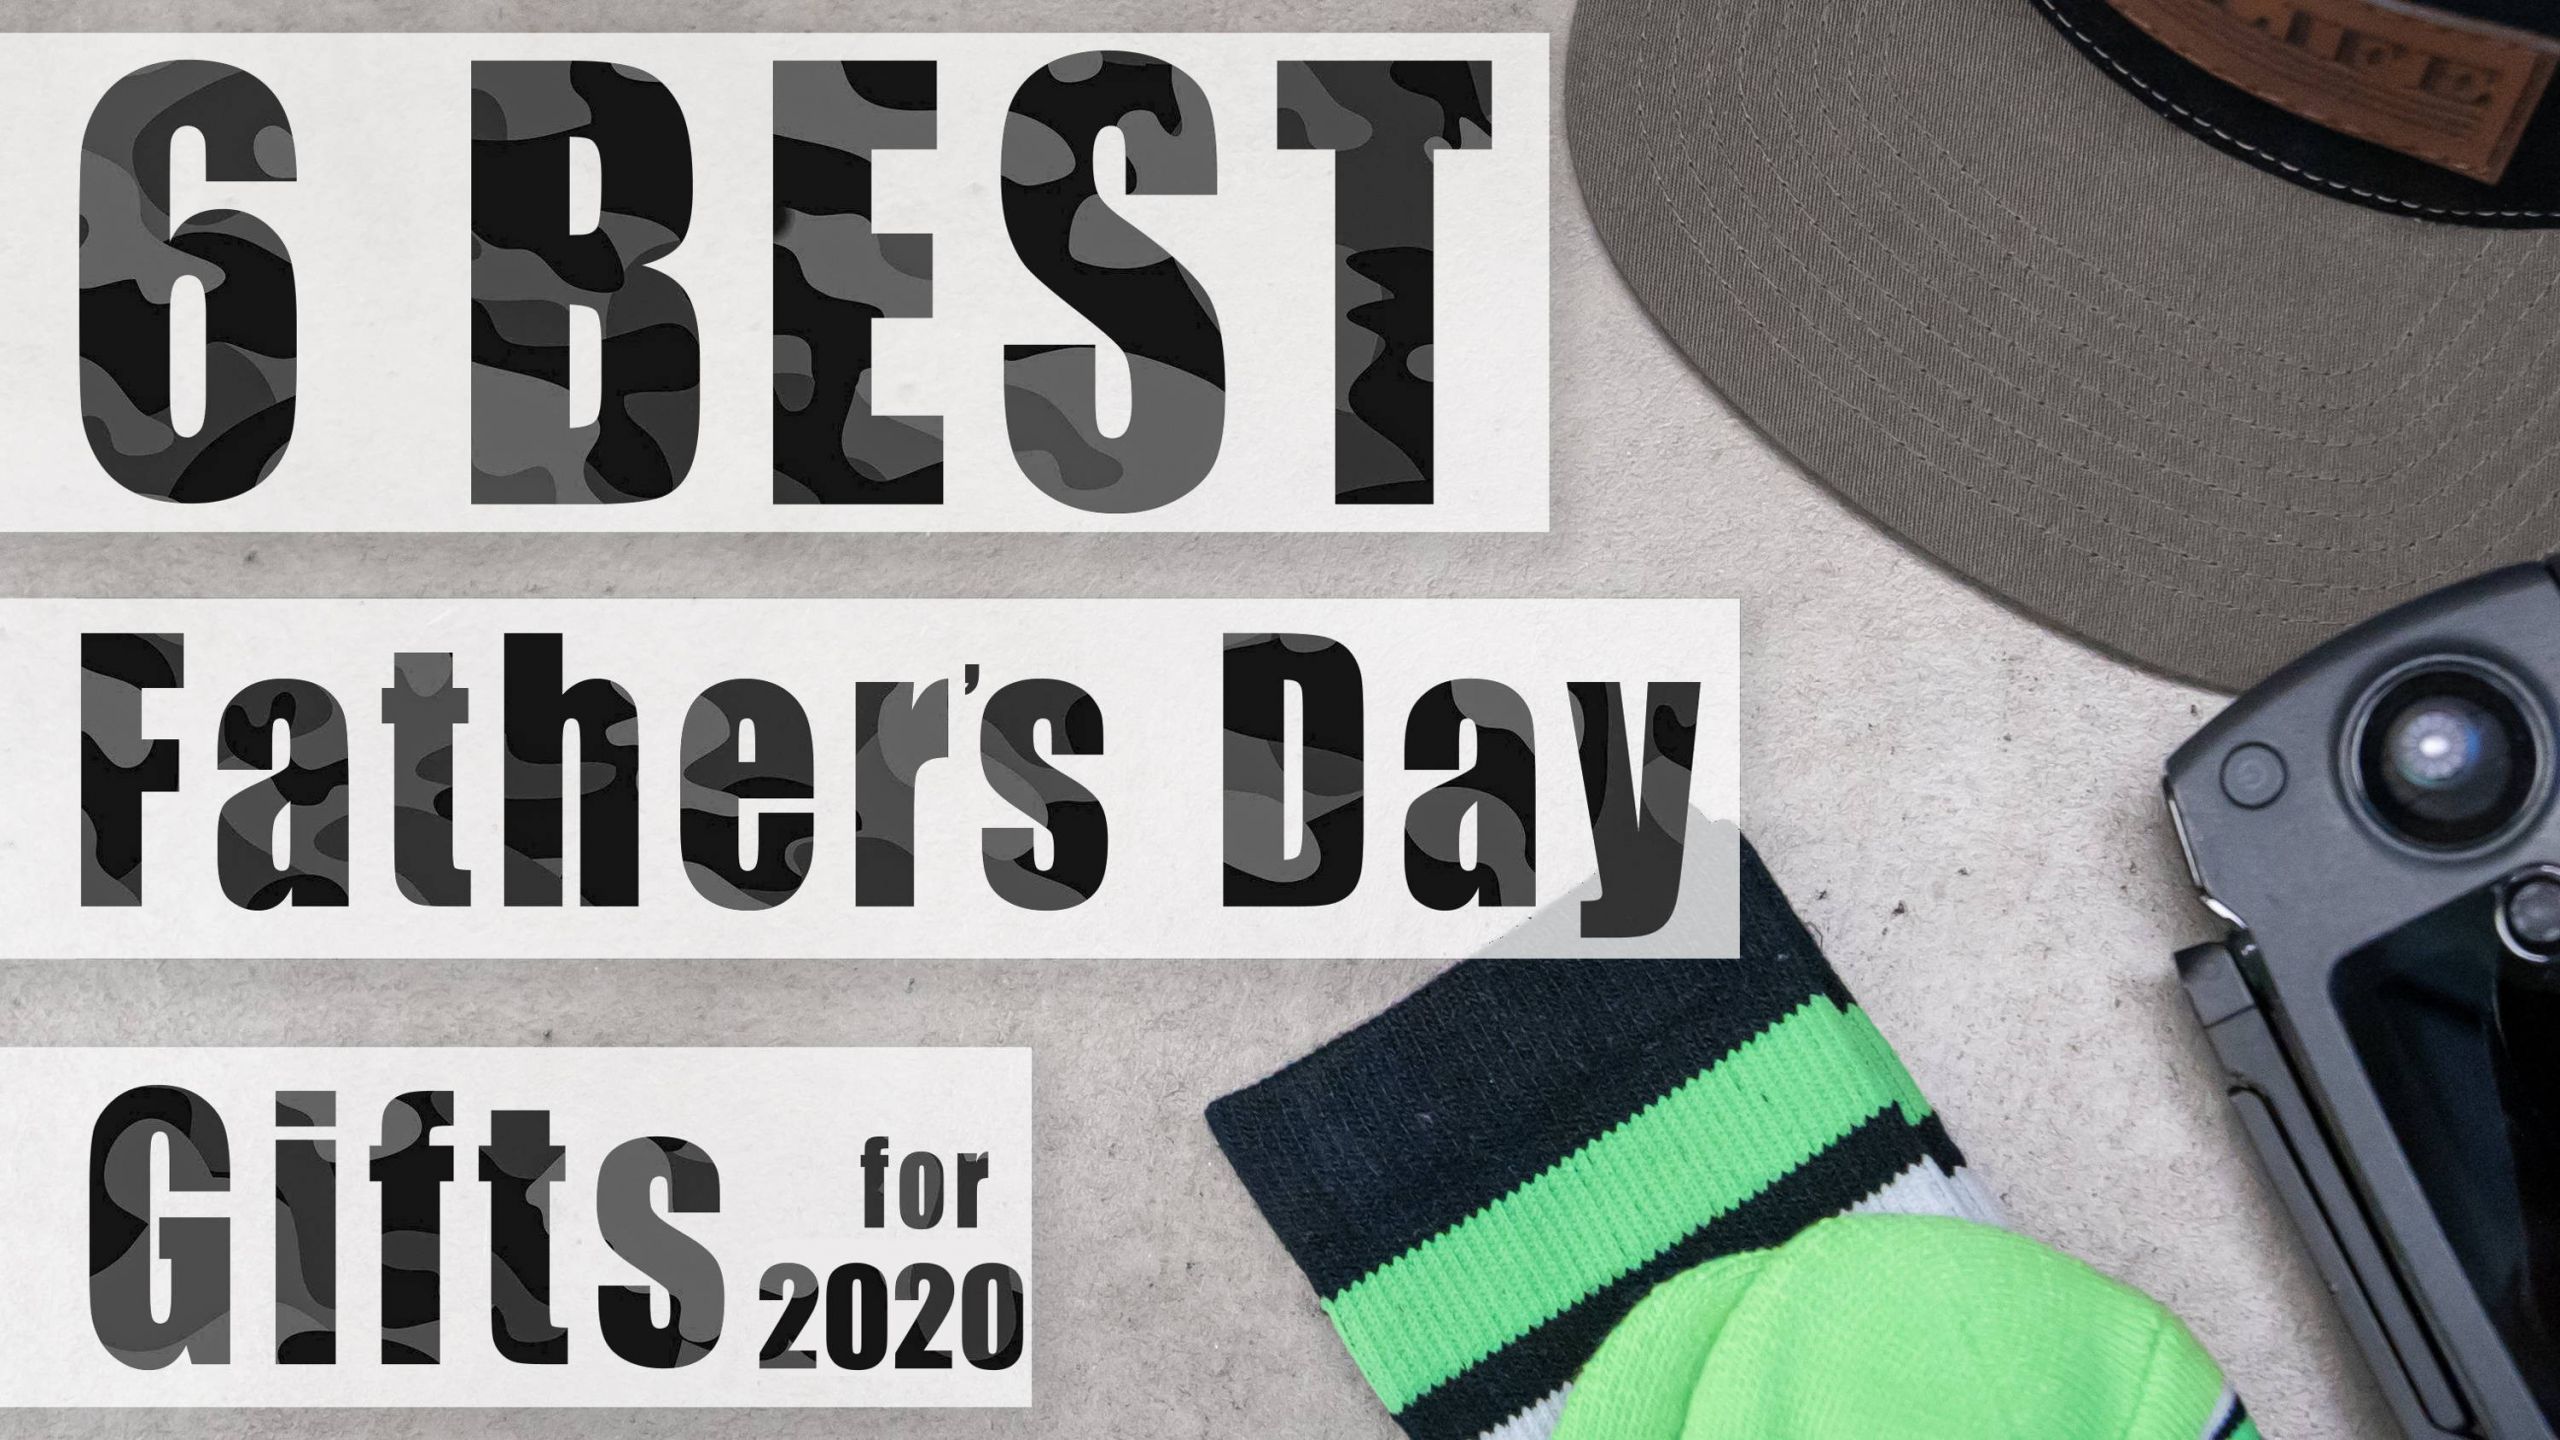 Best Fathers Day Gifts 2020
 Top 6 Best Father’s Day Gifts for 2020